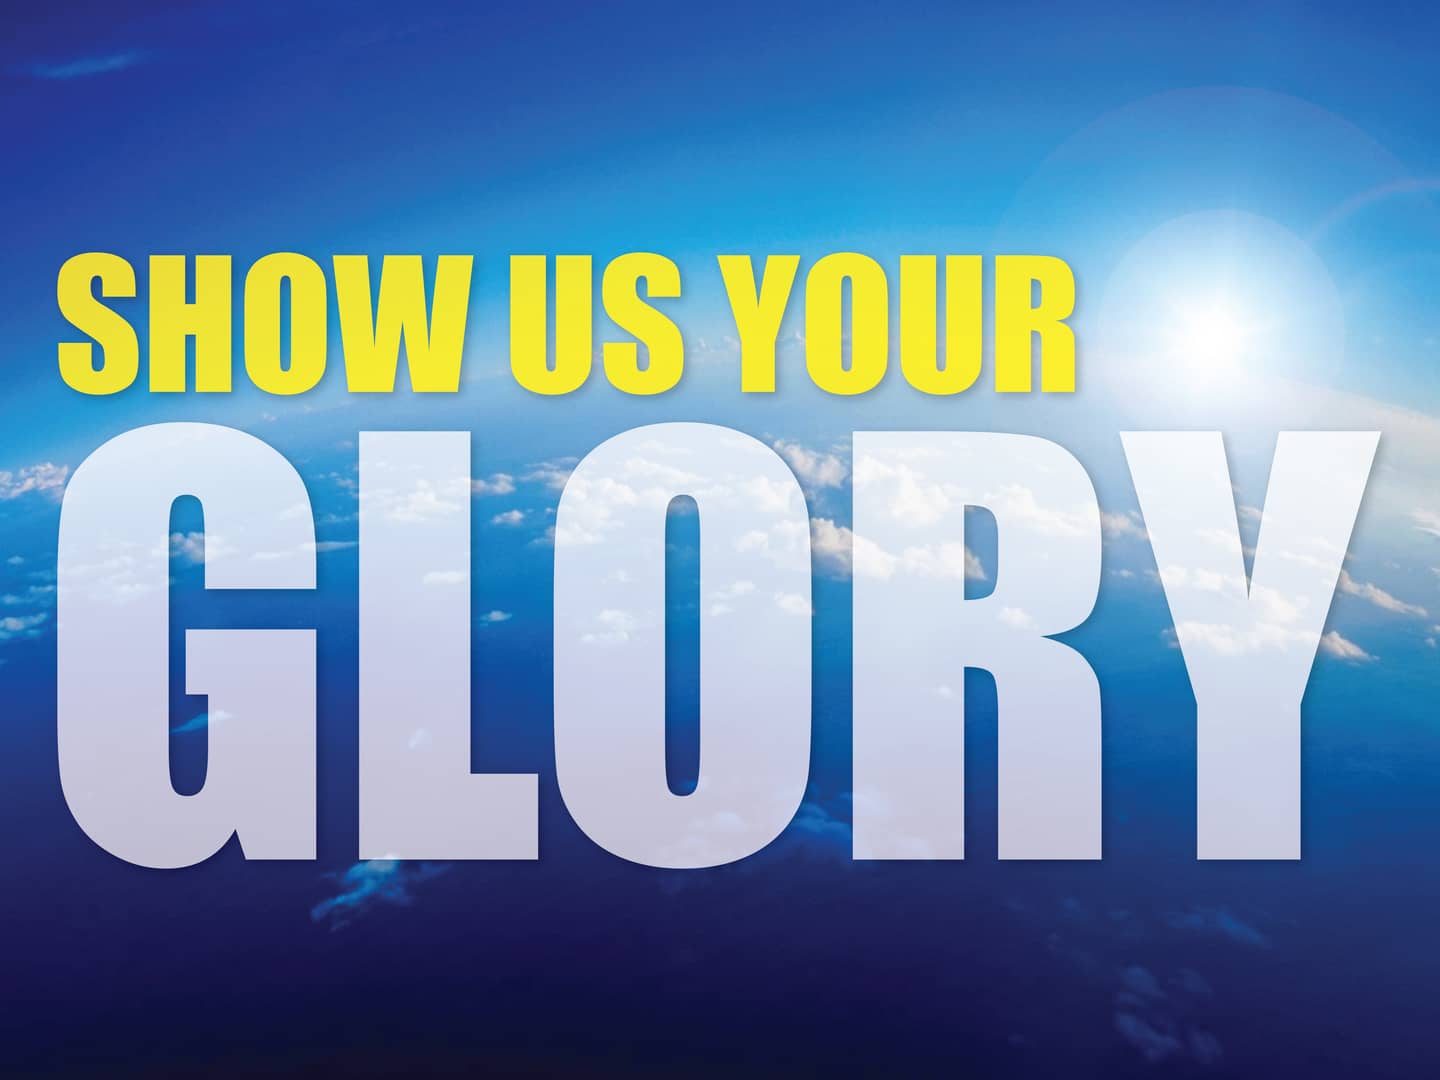 Show Us Your Glory